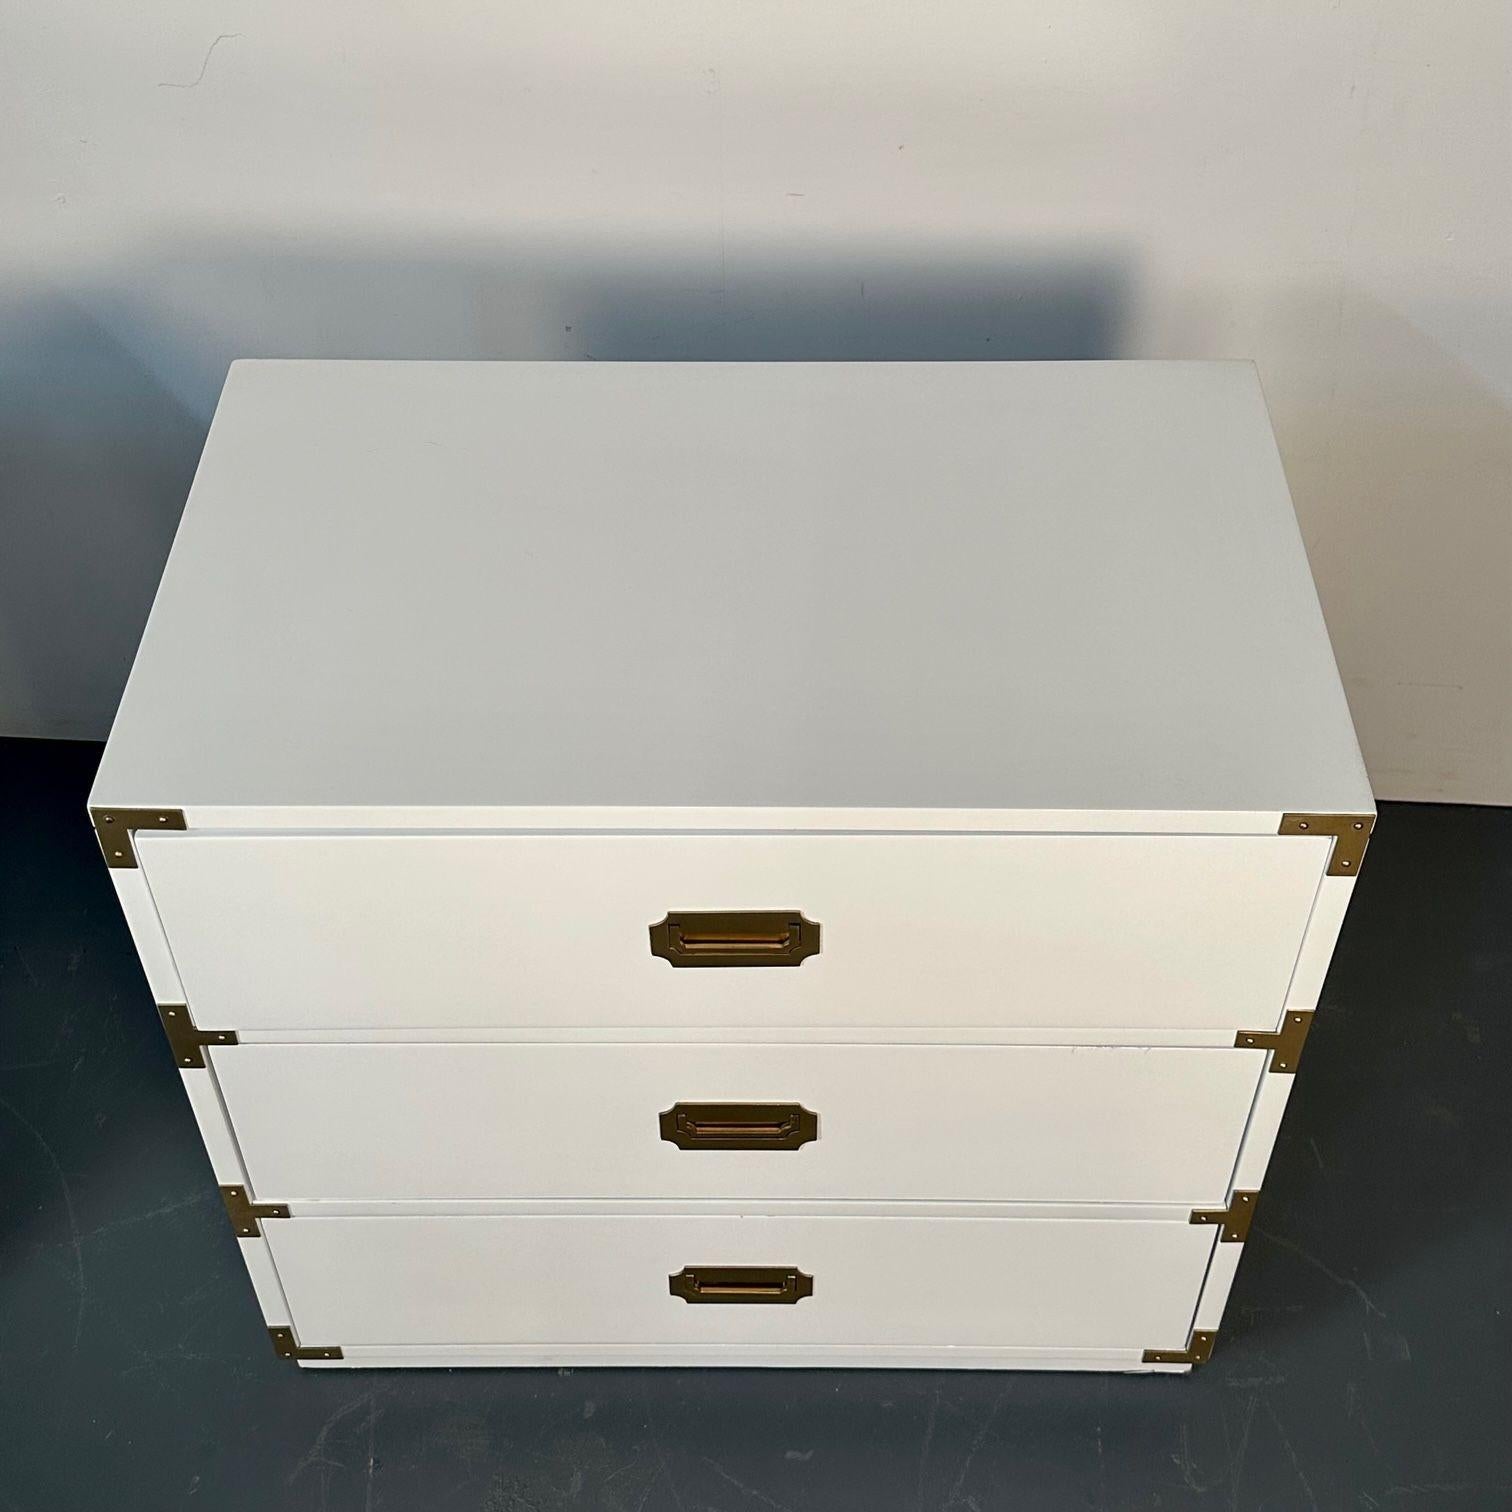 Pair of Mid-Century Modern White Campaign Dressers / Nightstands, Brass Accent
 
Set of two newly refinished white nightstands/dressers. Having a high gloss white lacquer finish with original brass hardware. Matching dresser available separately.